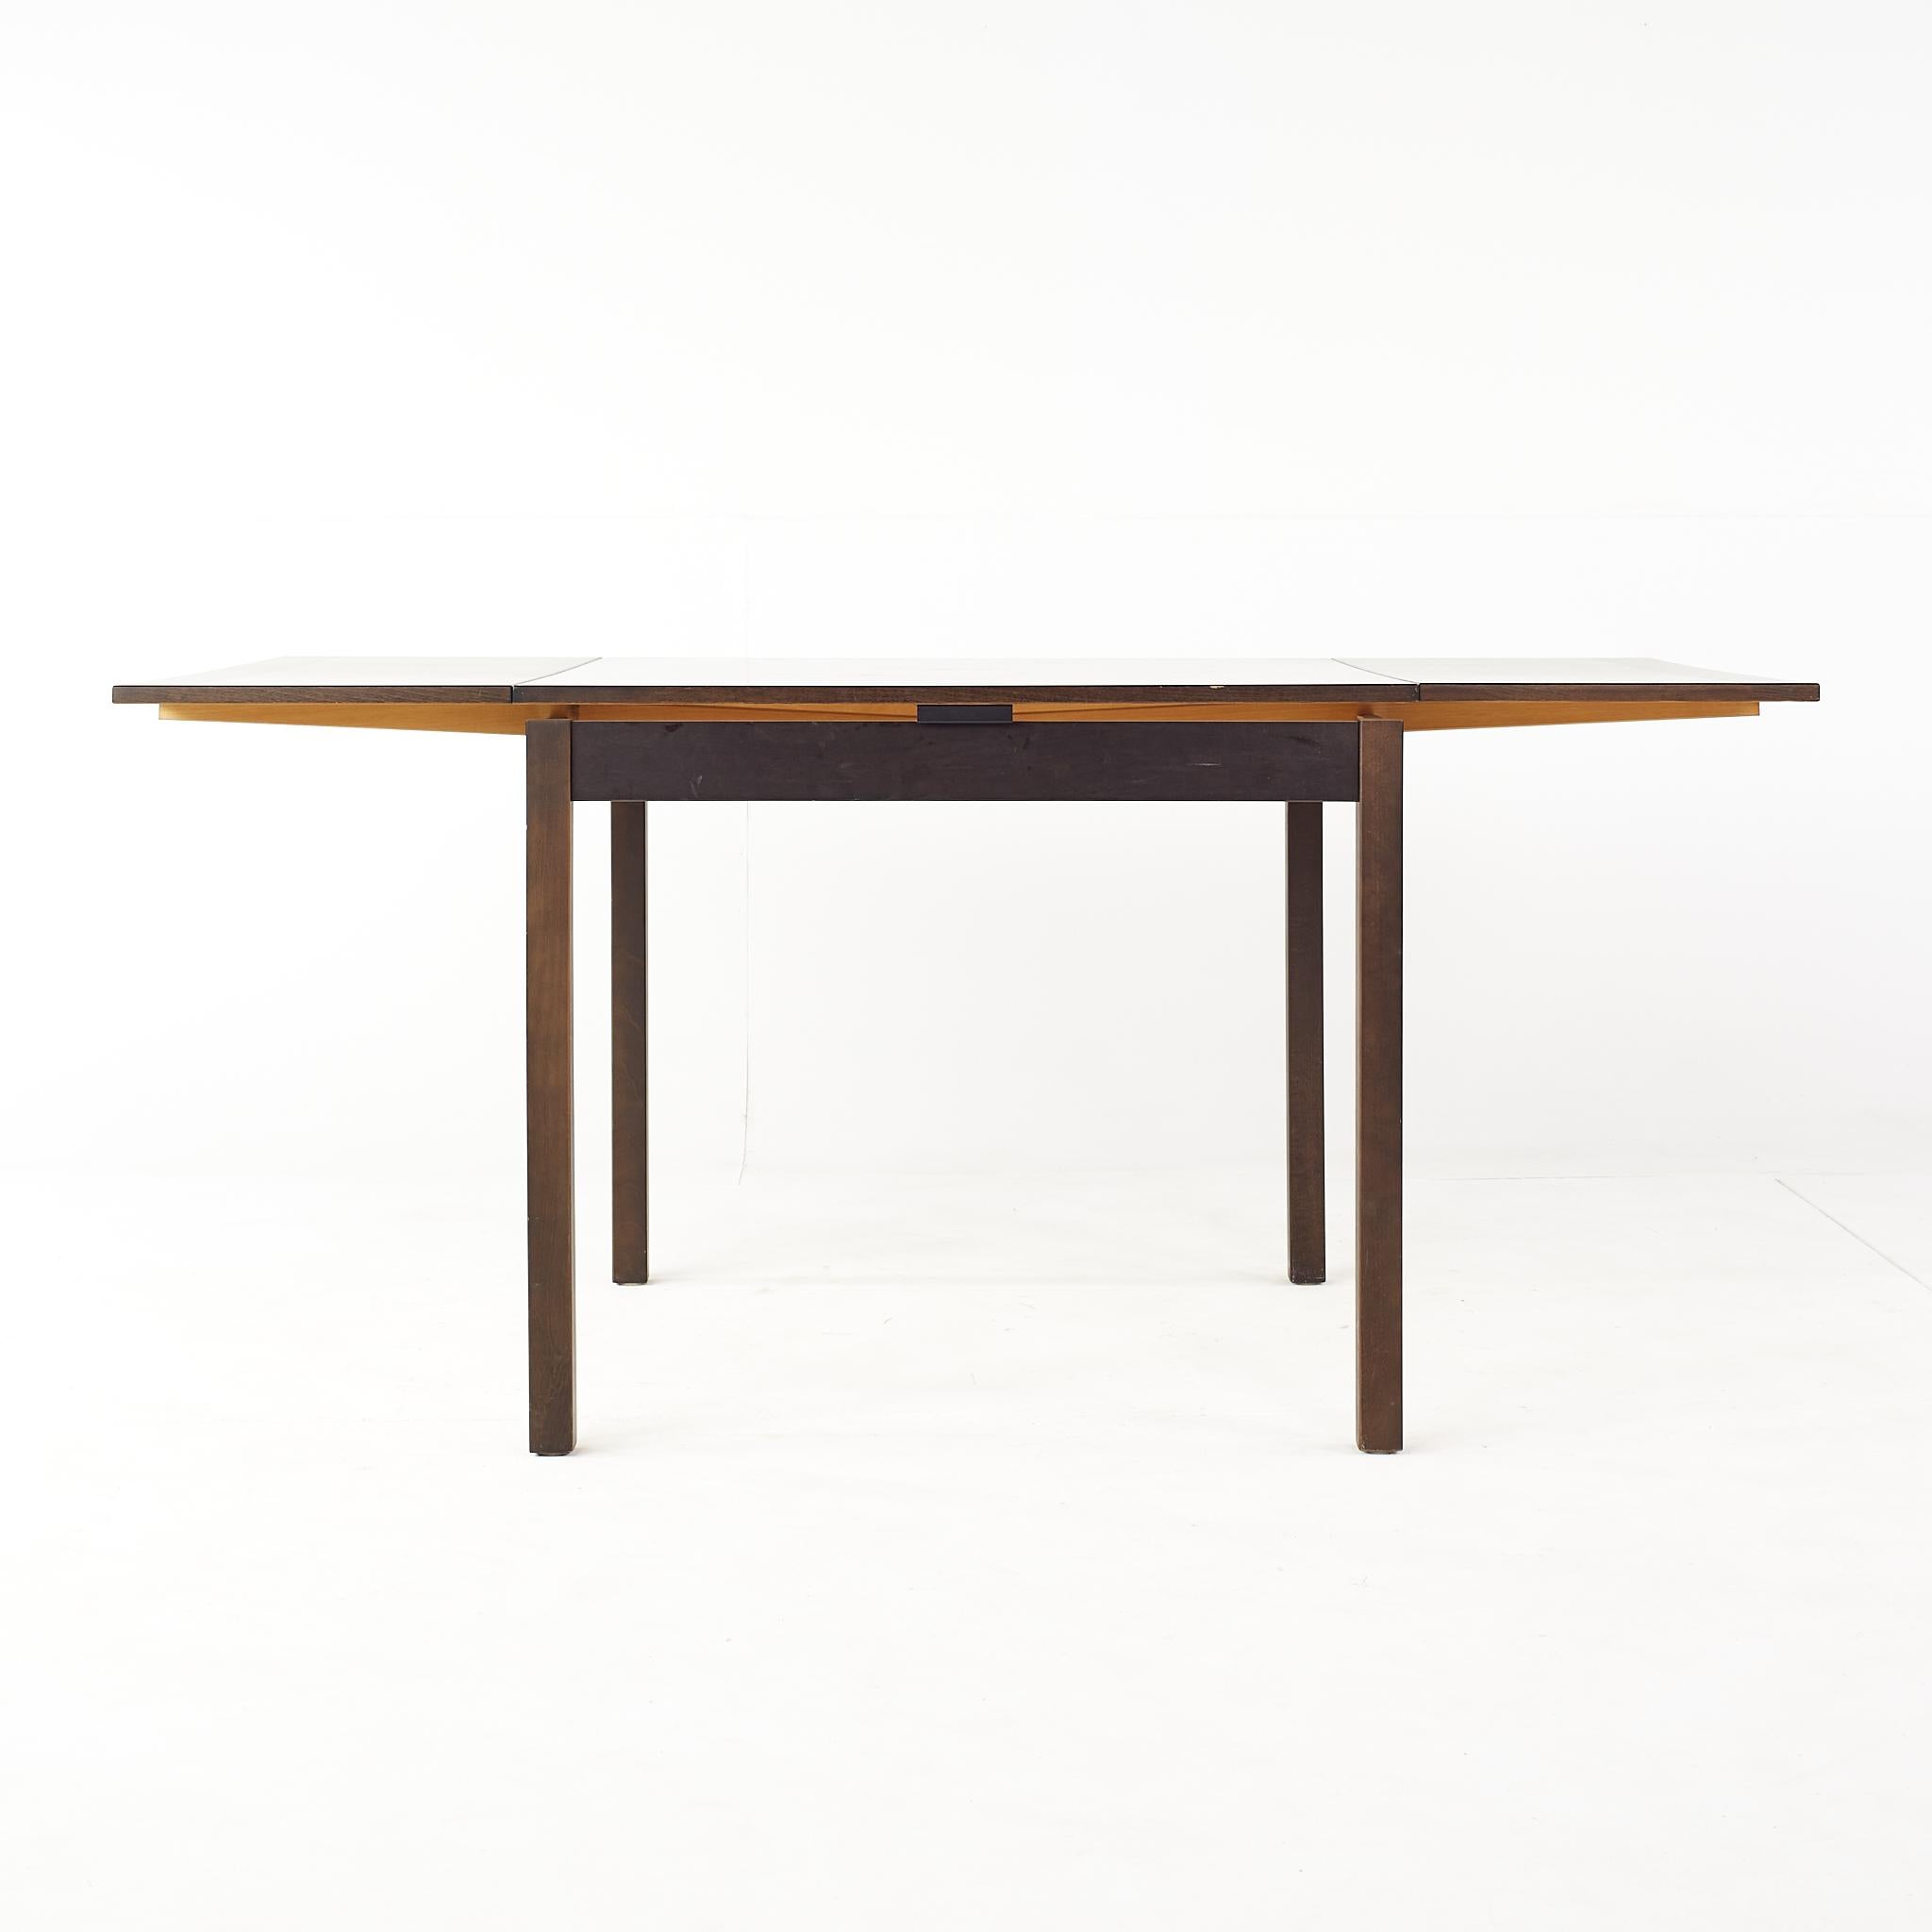 Late 20th Century Ansager Mobler Mid-Century Danish Walnut Hidden Leaf Dining Table For Sale